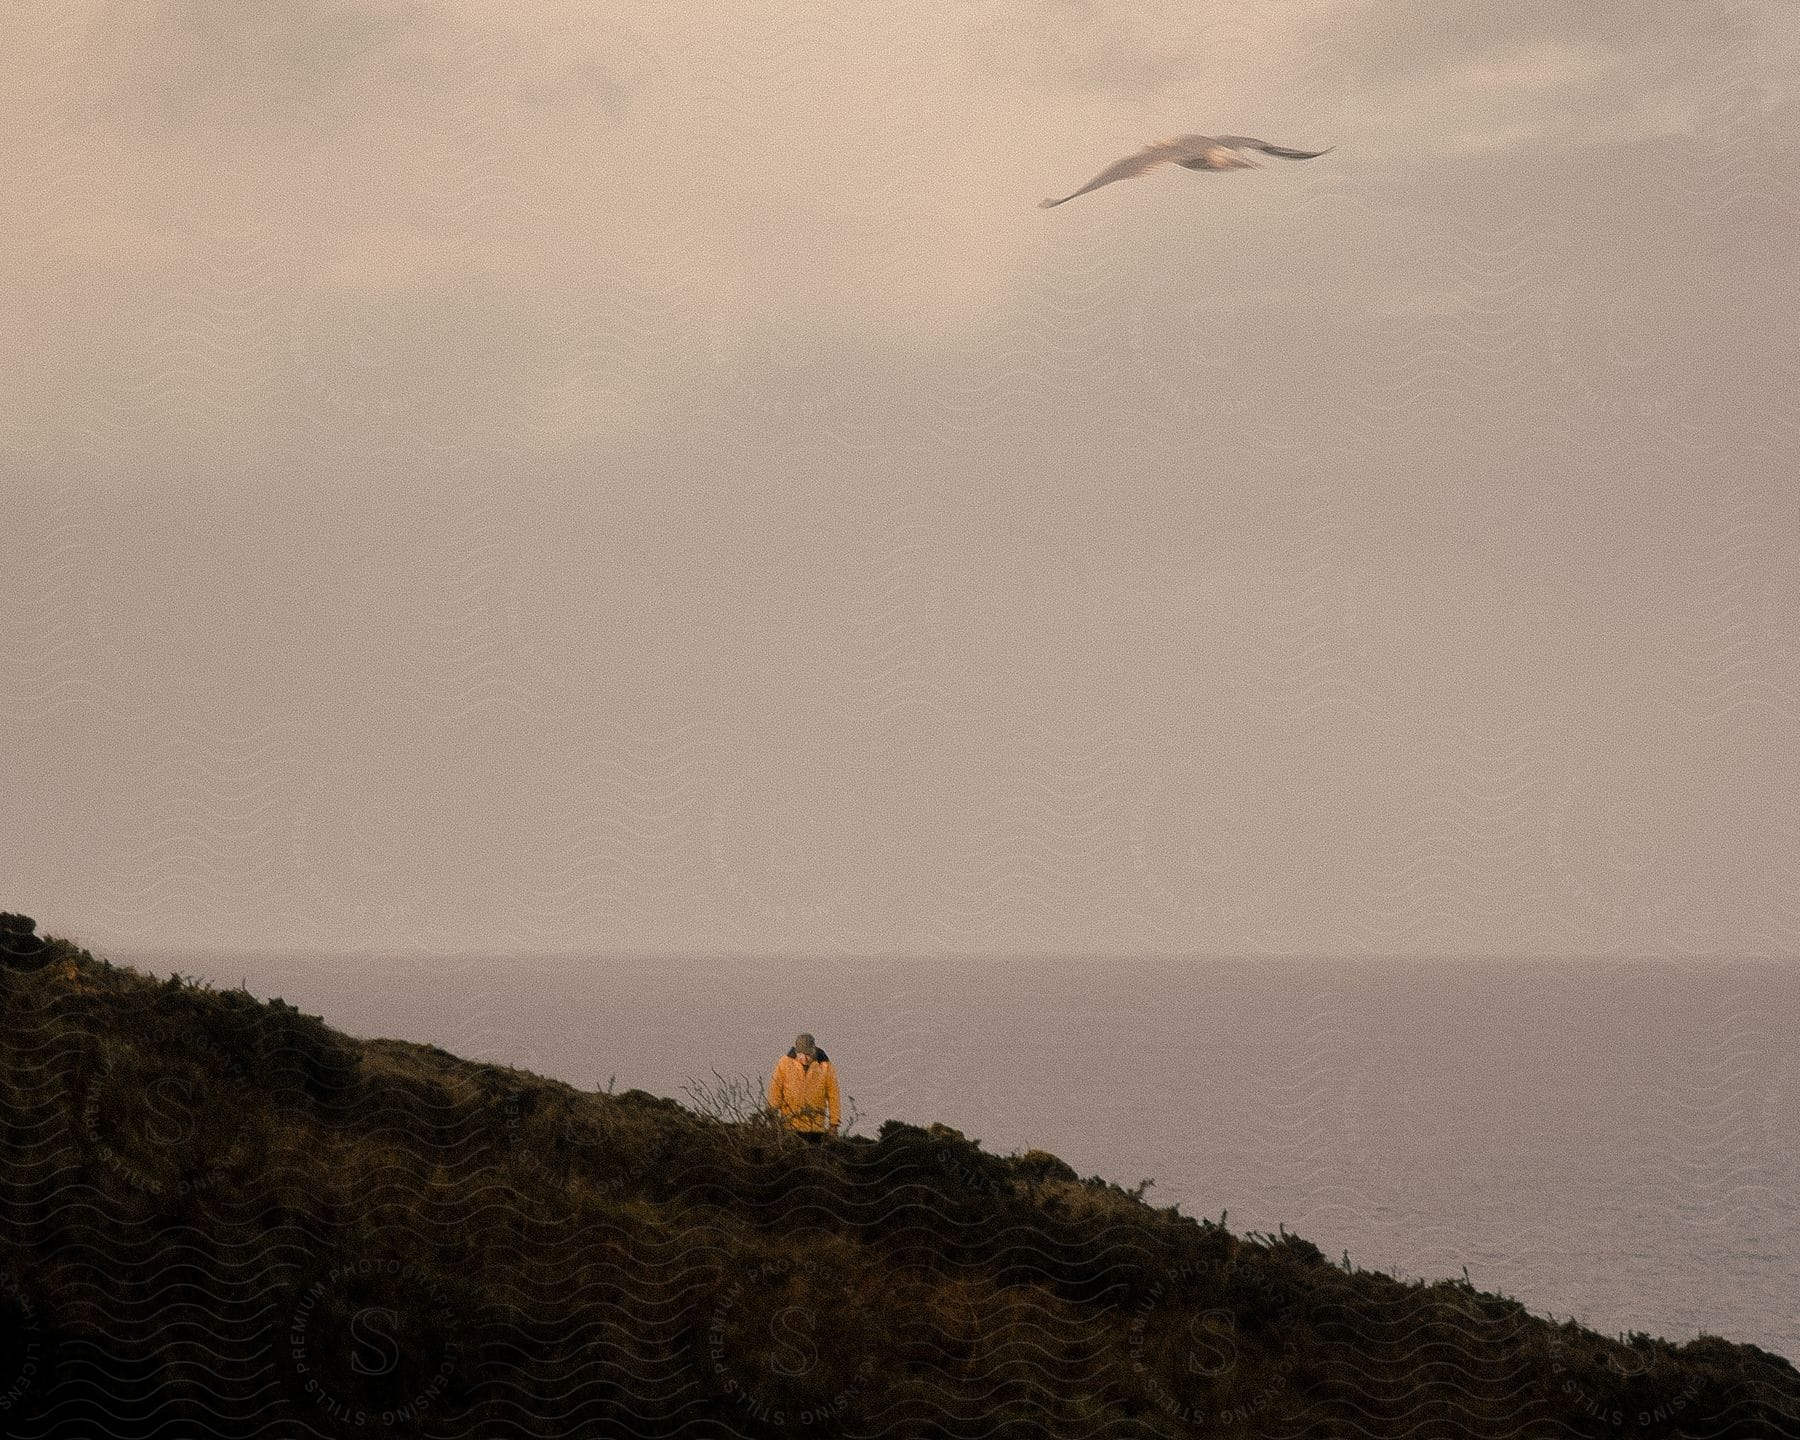 A person wearing a yellow jacket sitting on a sloping terrain with grass, while a bird flies across the sky.